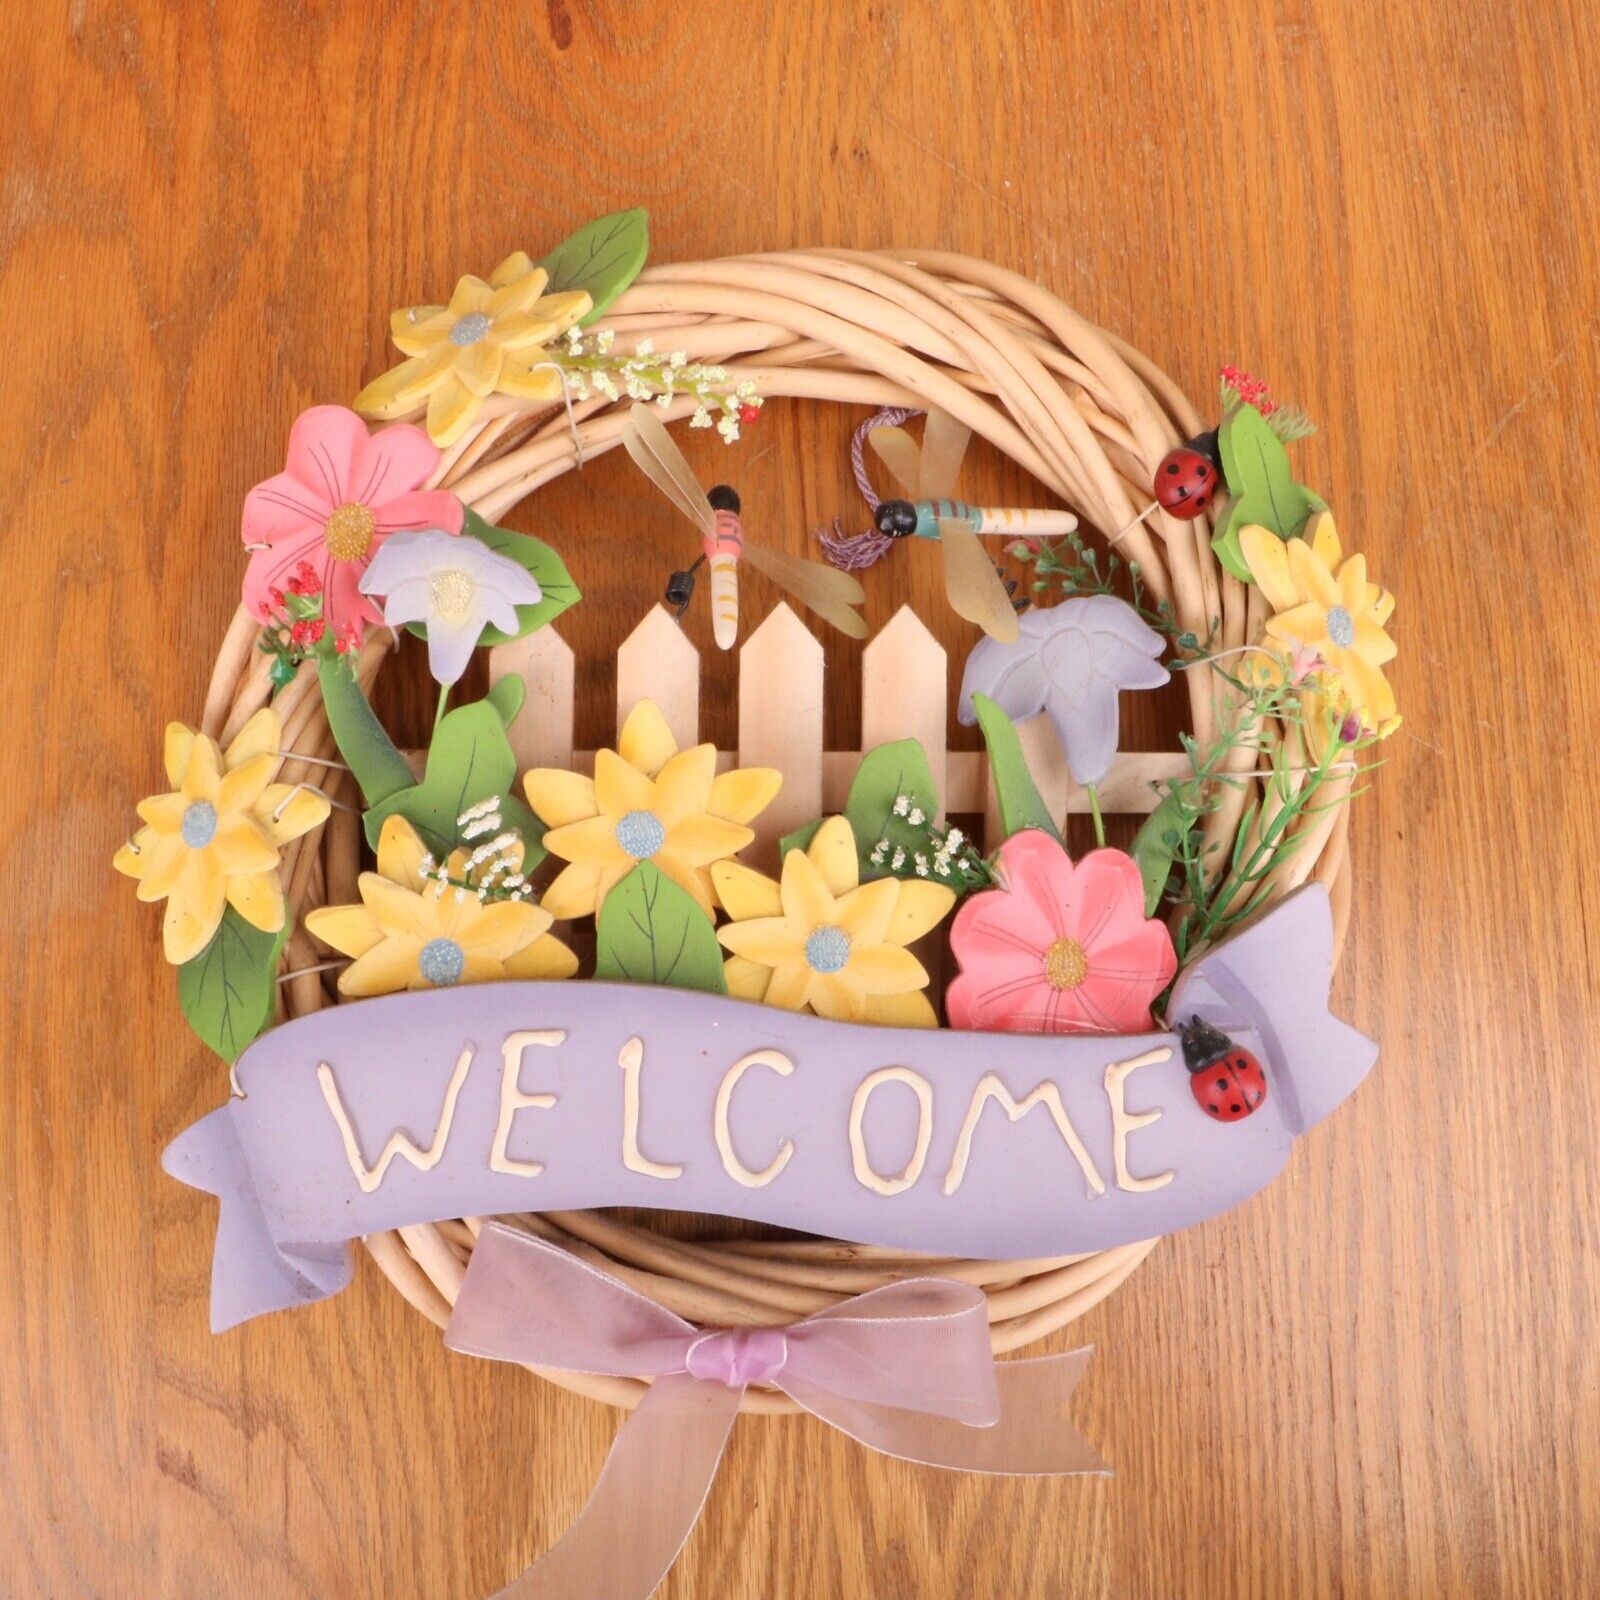 Wood Welcome Decorative Door Wall Wreath Fence Flowers Dragonfly